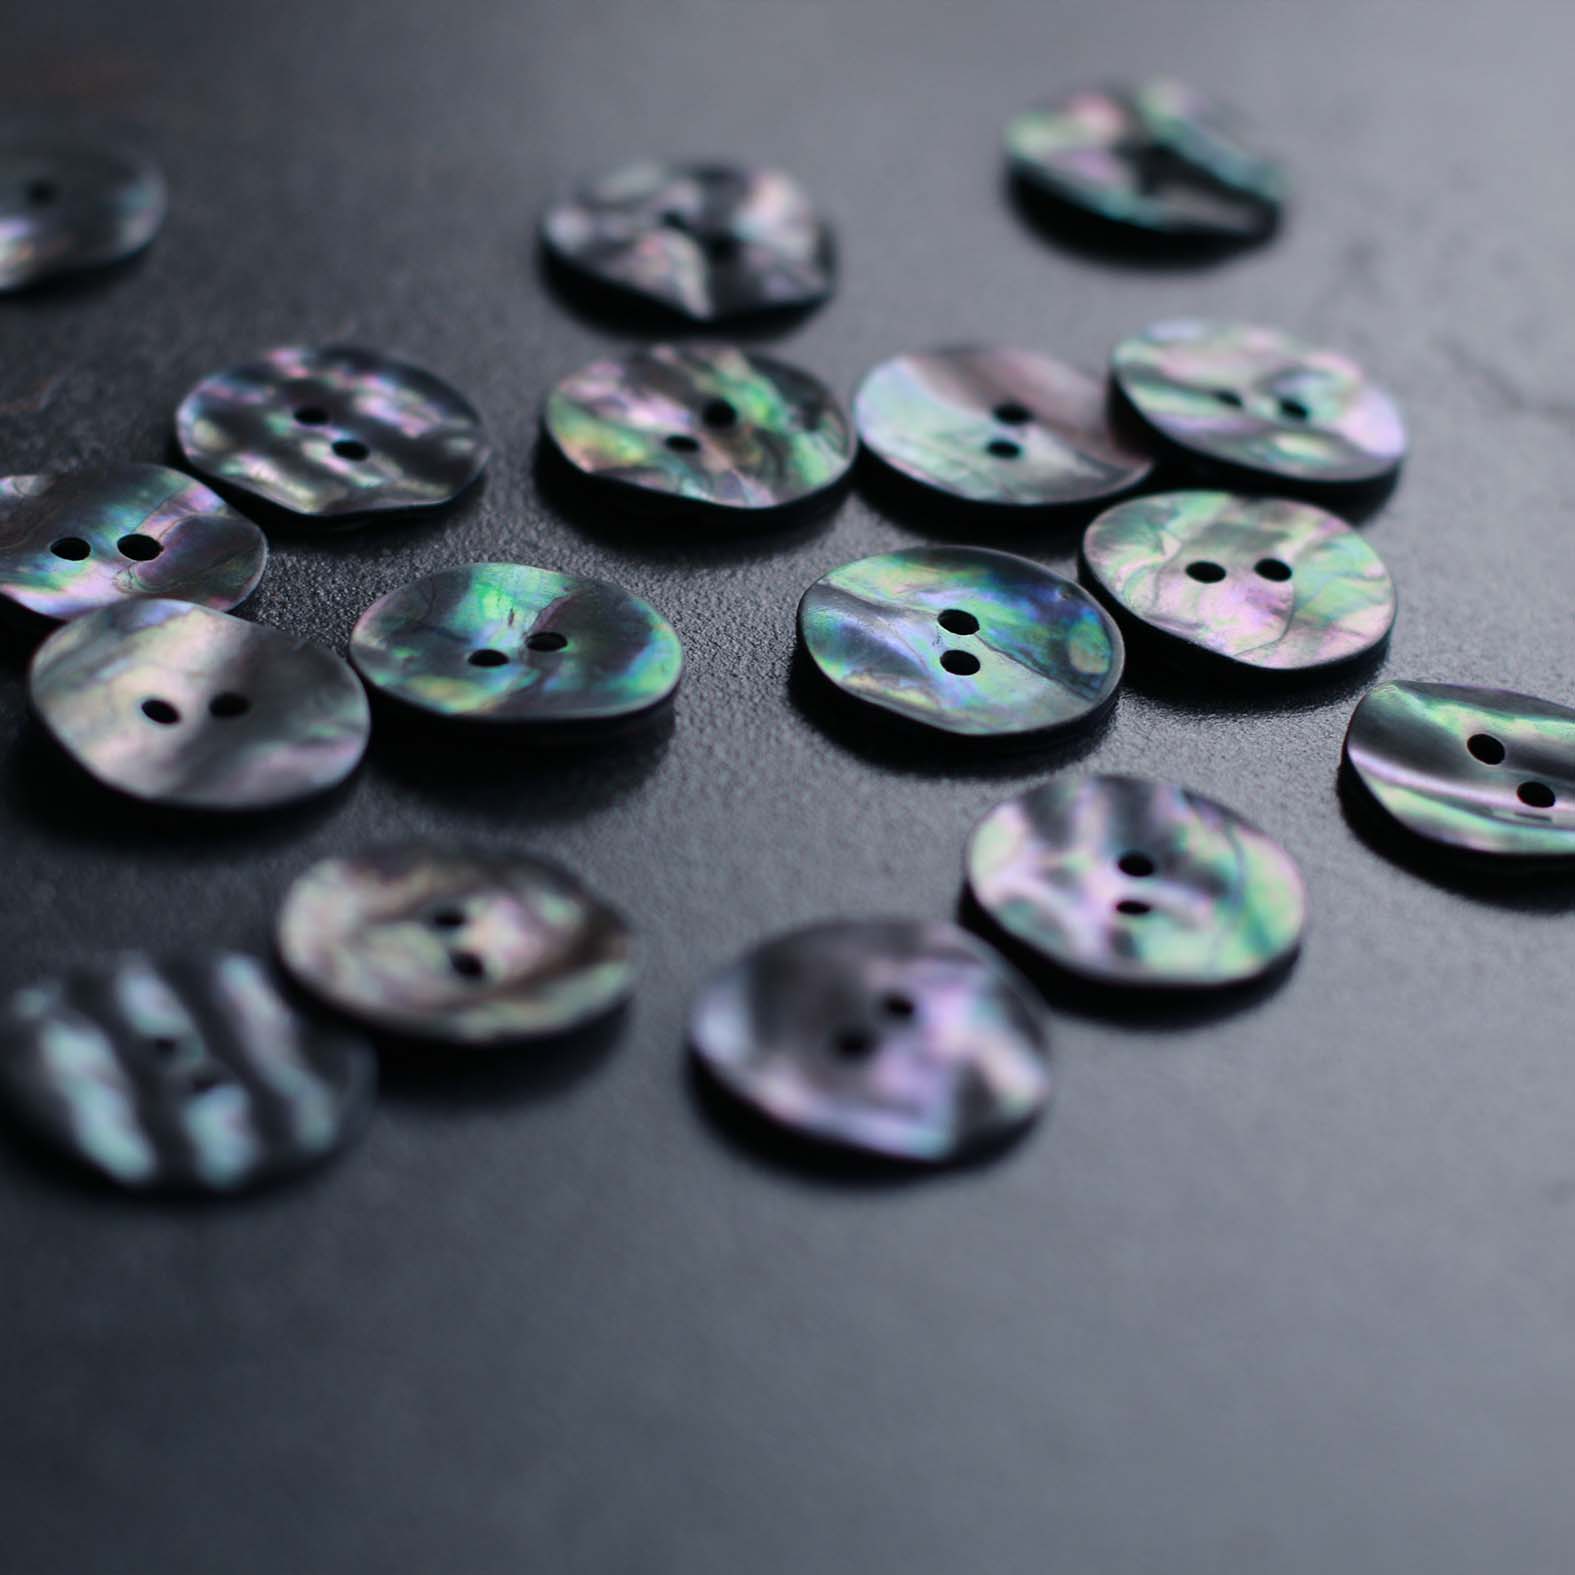 20mm Mother of Pearl Button - Dark